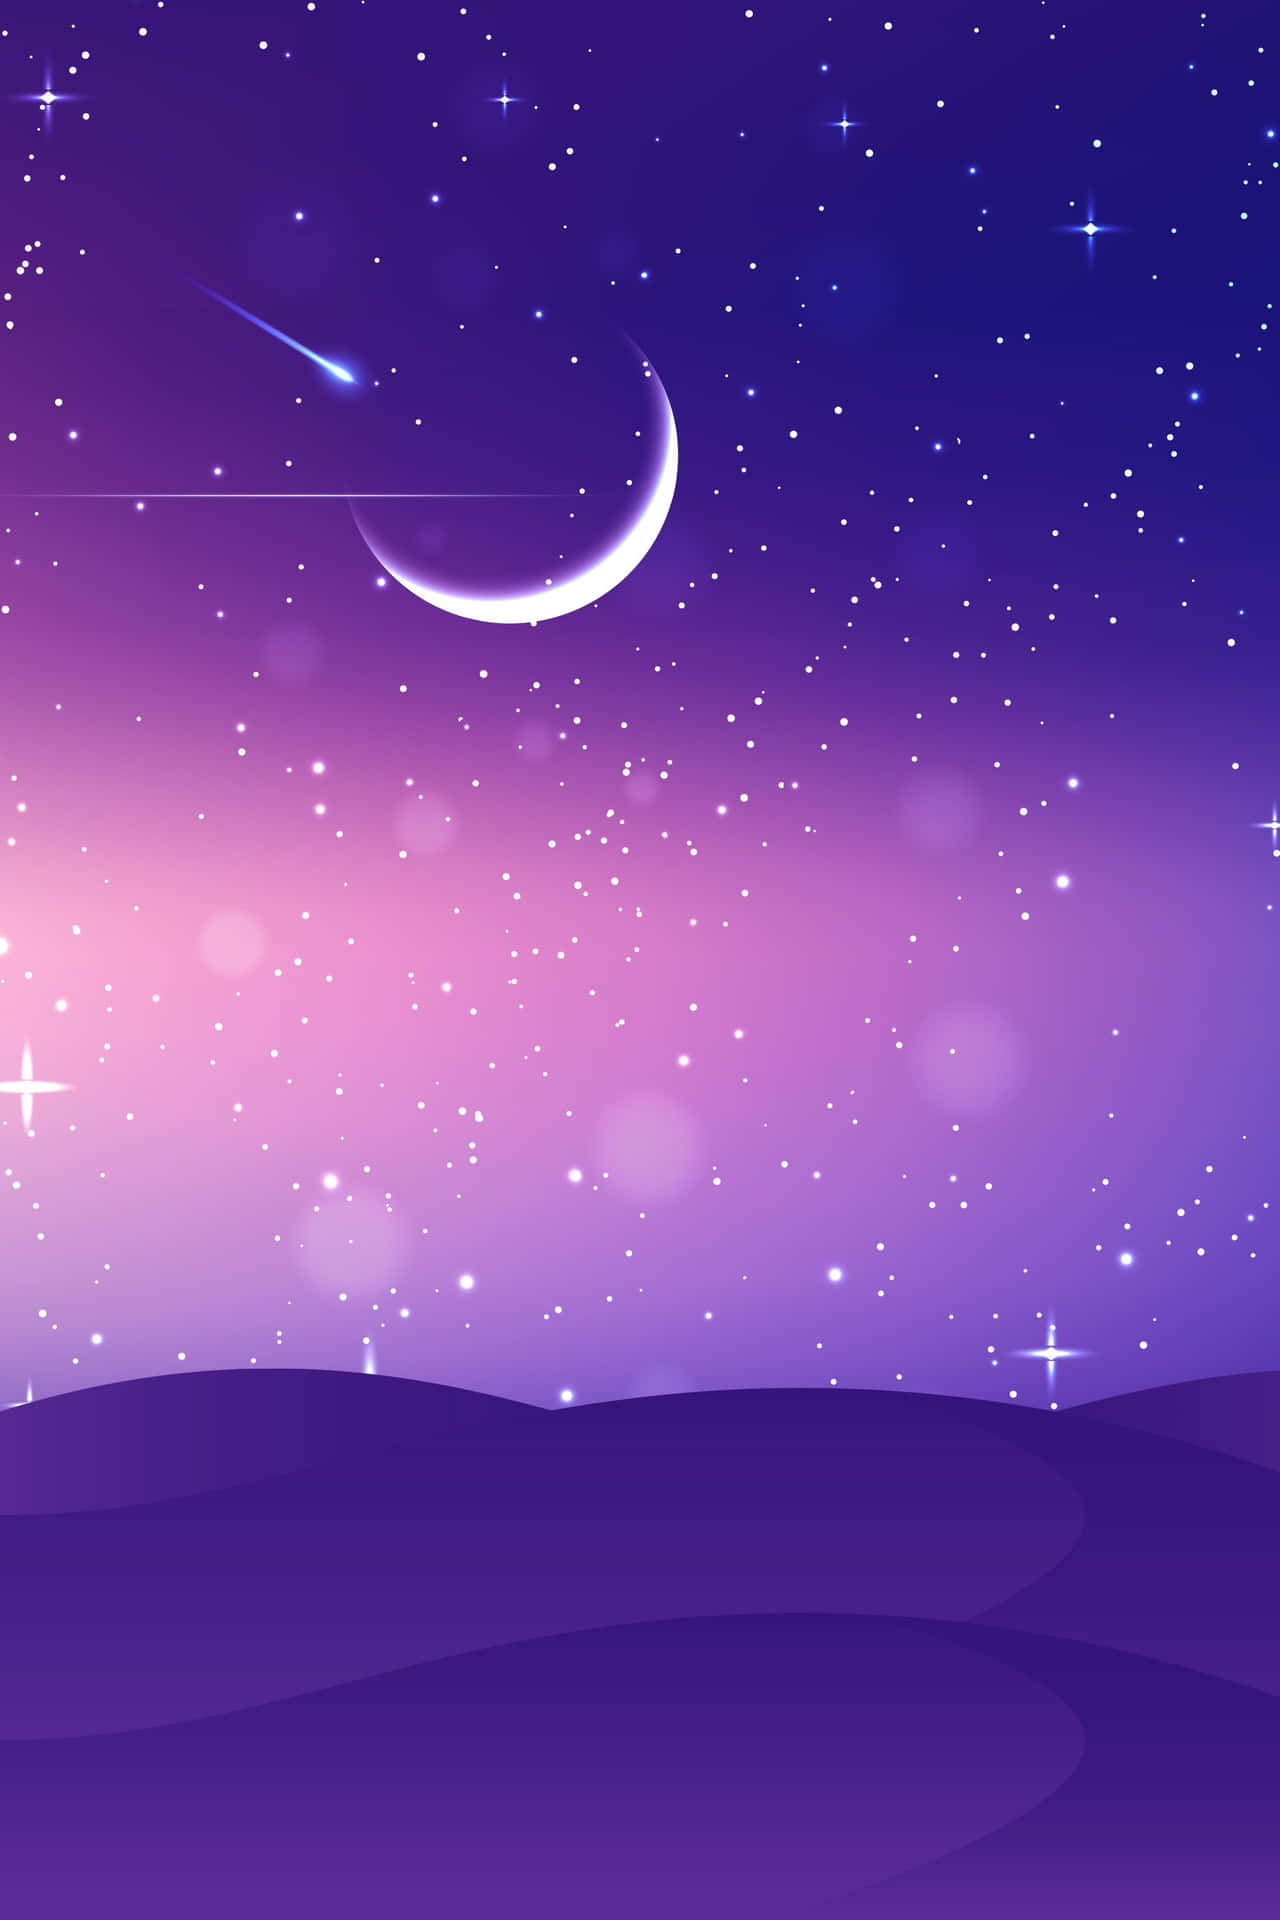 Aesthetic Purple Pink Night Sky Moon Picture